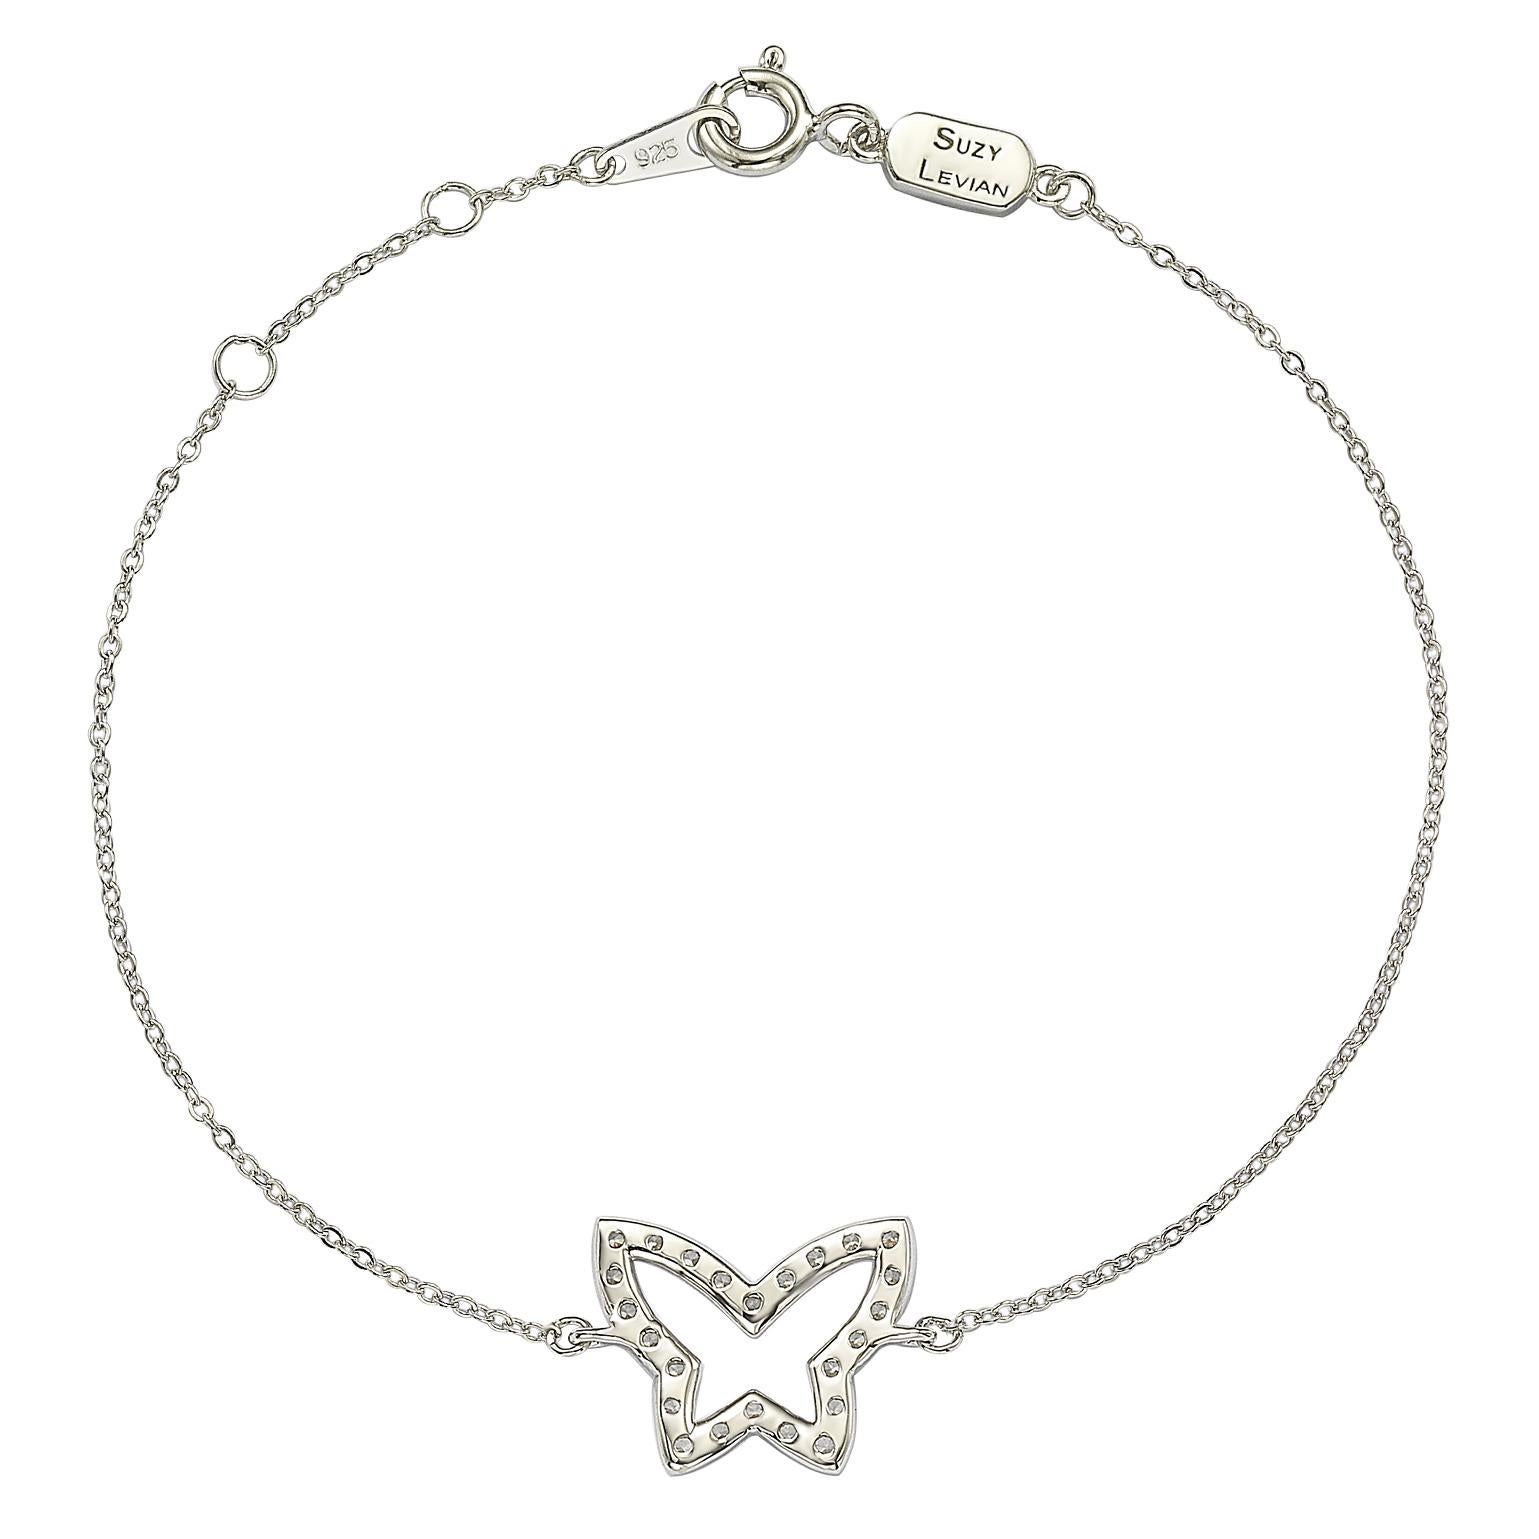 This elegant Suzy Levian butterfly solitaire bracelet features 24 diamonds, which are 1.4 mm size totals .30 cttw, all set in 14K white gold setting. Each diamond butterfly is attached to a chain that is secured with a spring ring closure with a